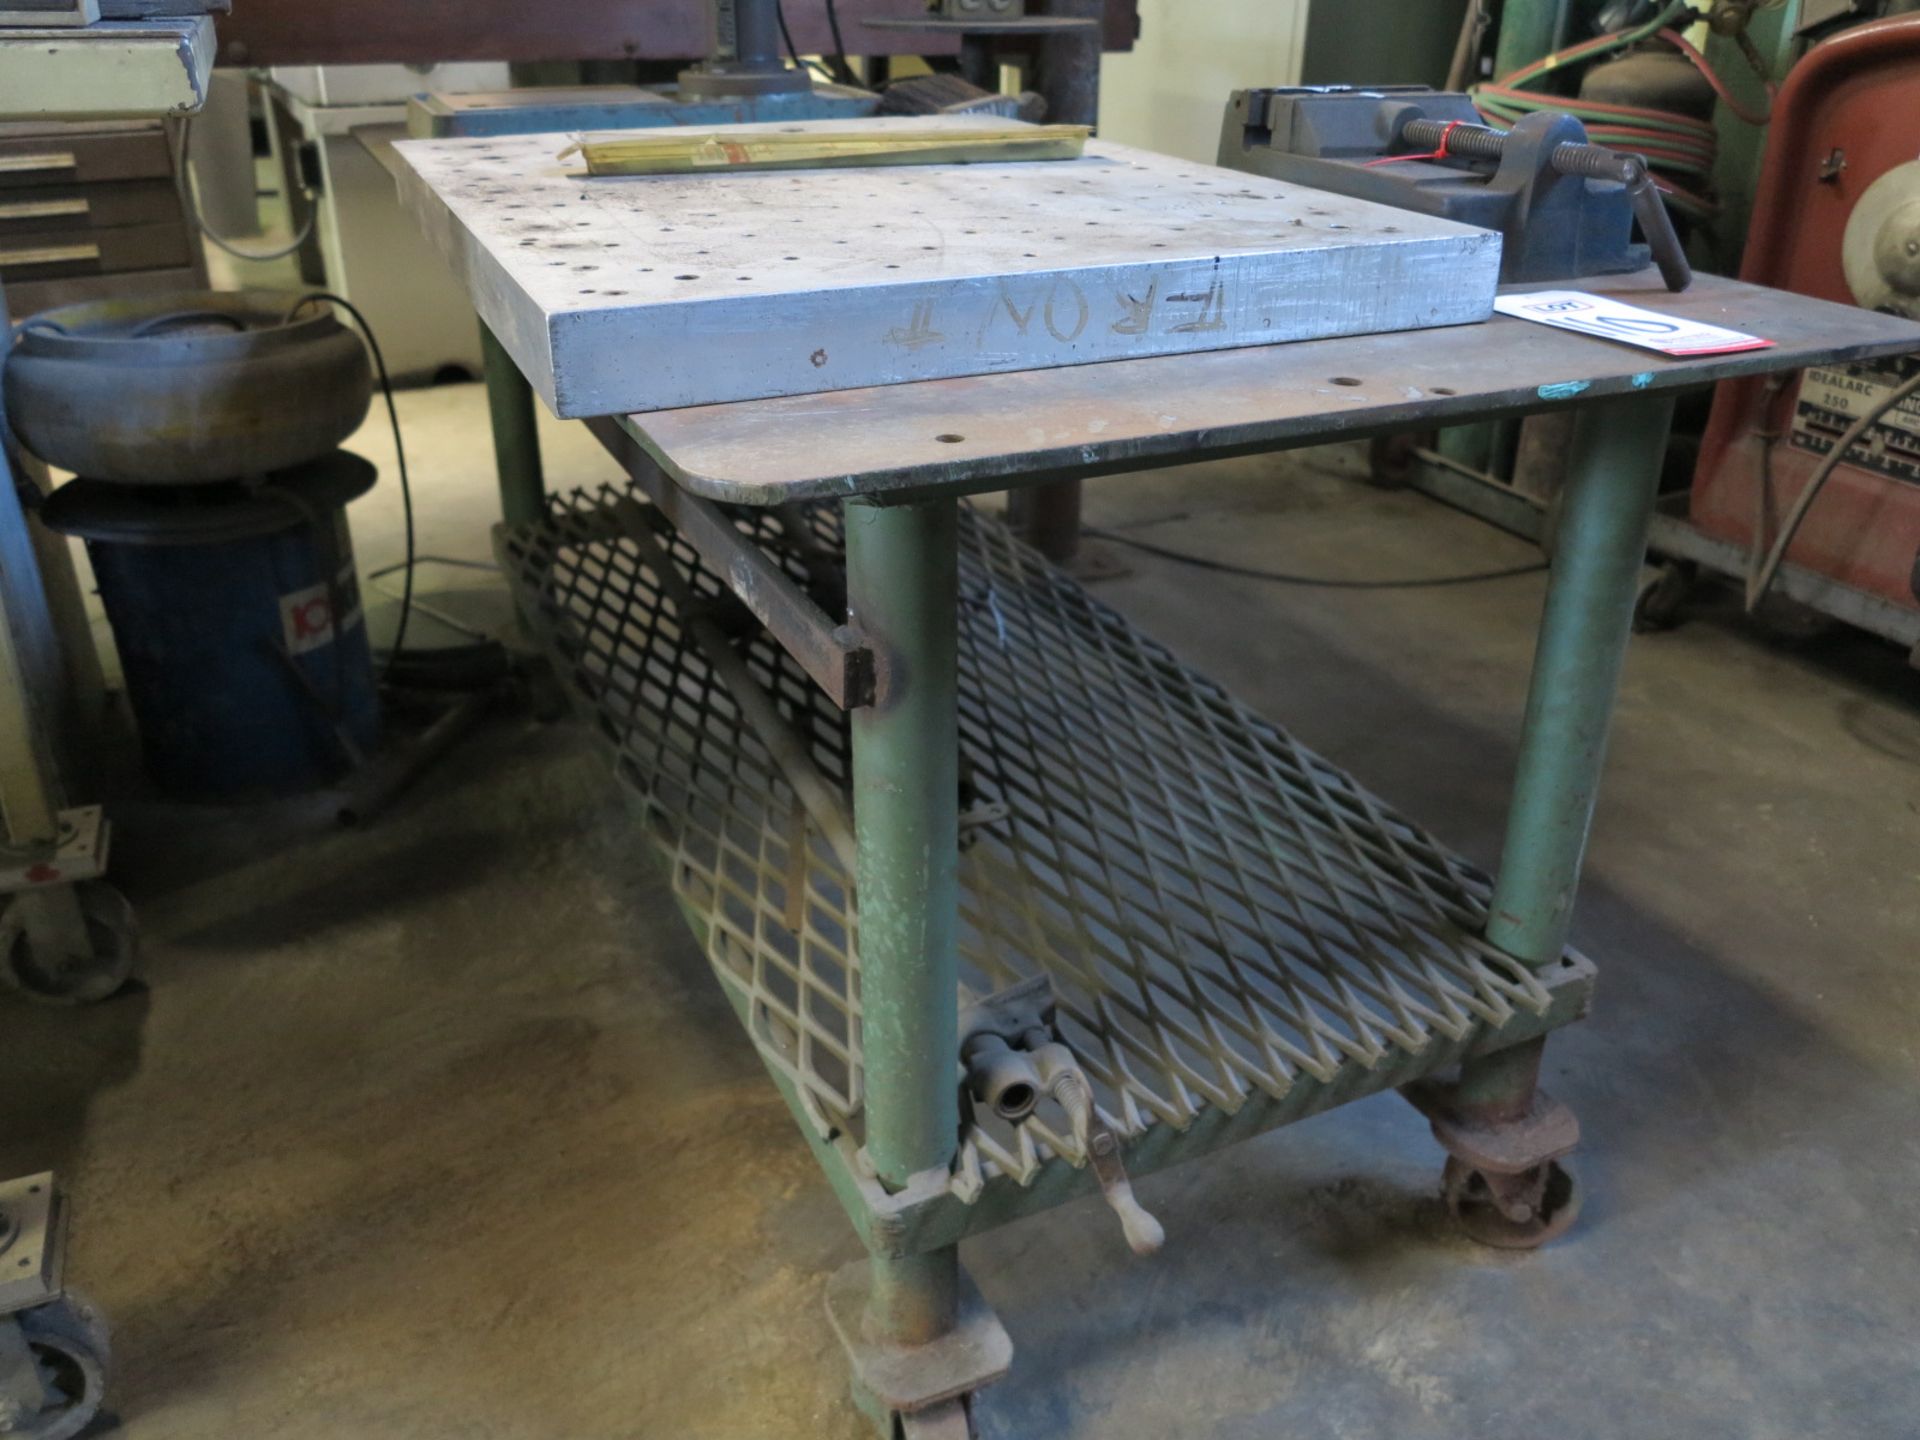 LOT - STEEL TABLE ON CASTERS, 60" X 30", TOP IS 3/8" THICK, W/ ALUMINUM FIXTURE PLATE, 28" X 21" X